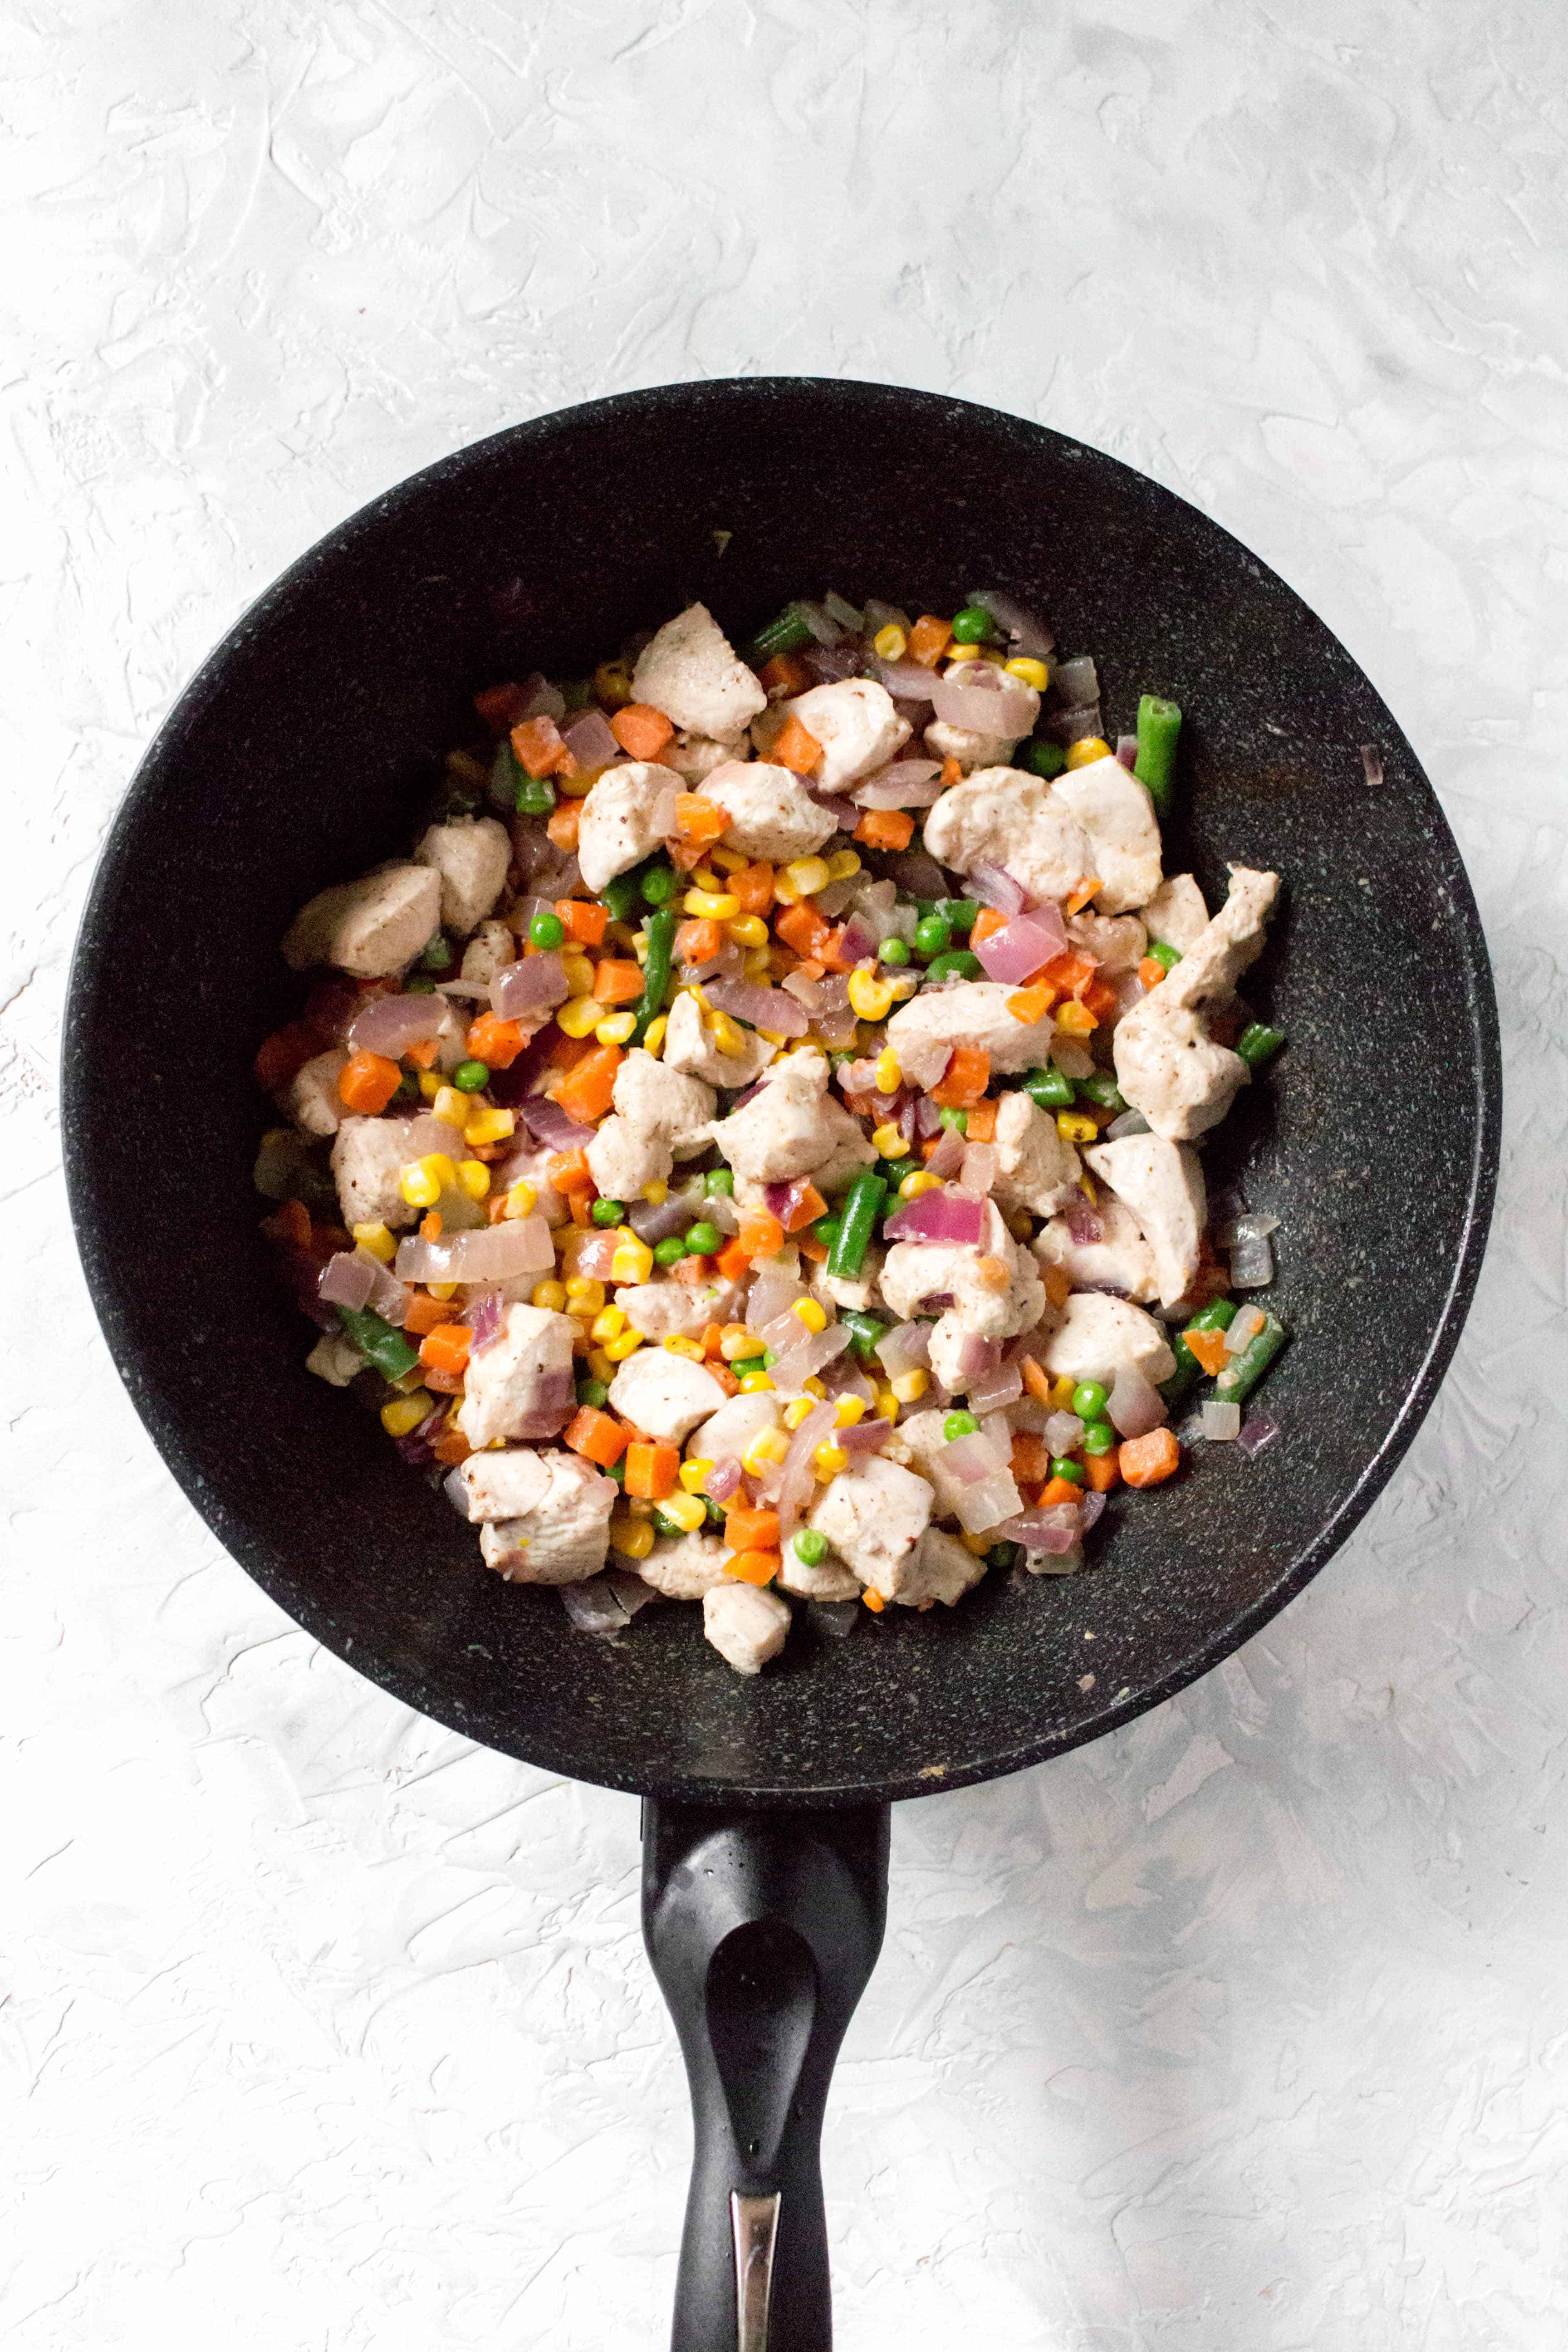 Next, add in your chicken breast. Cook for 5-7 minutes, until it's almost cooked through and then add in the frozen vegetables. Cook until the vegetables have softened.